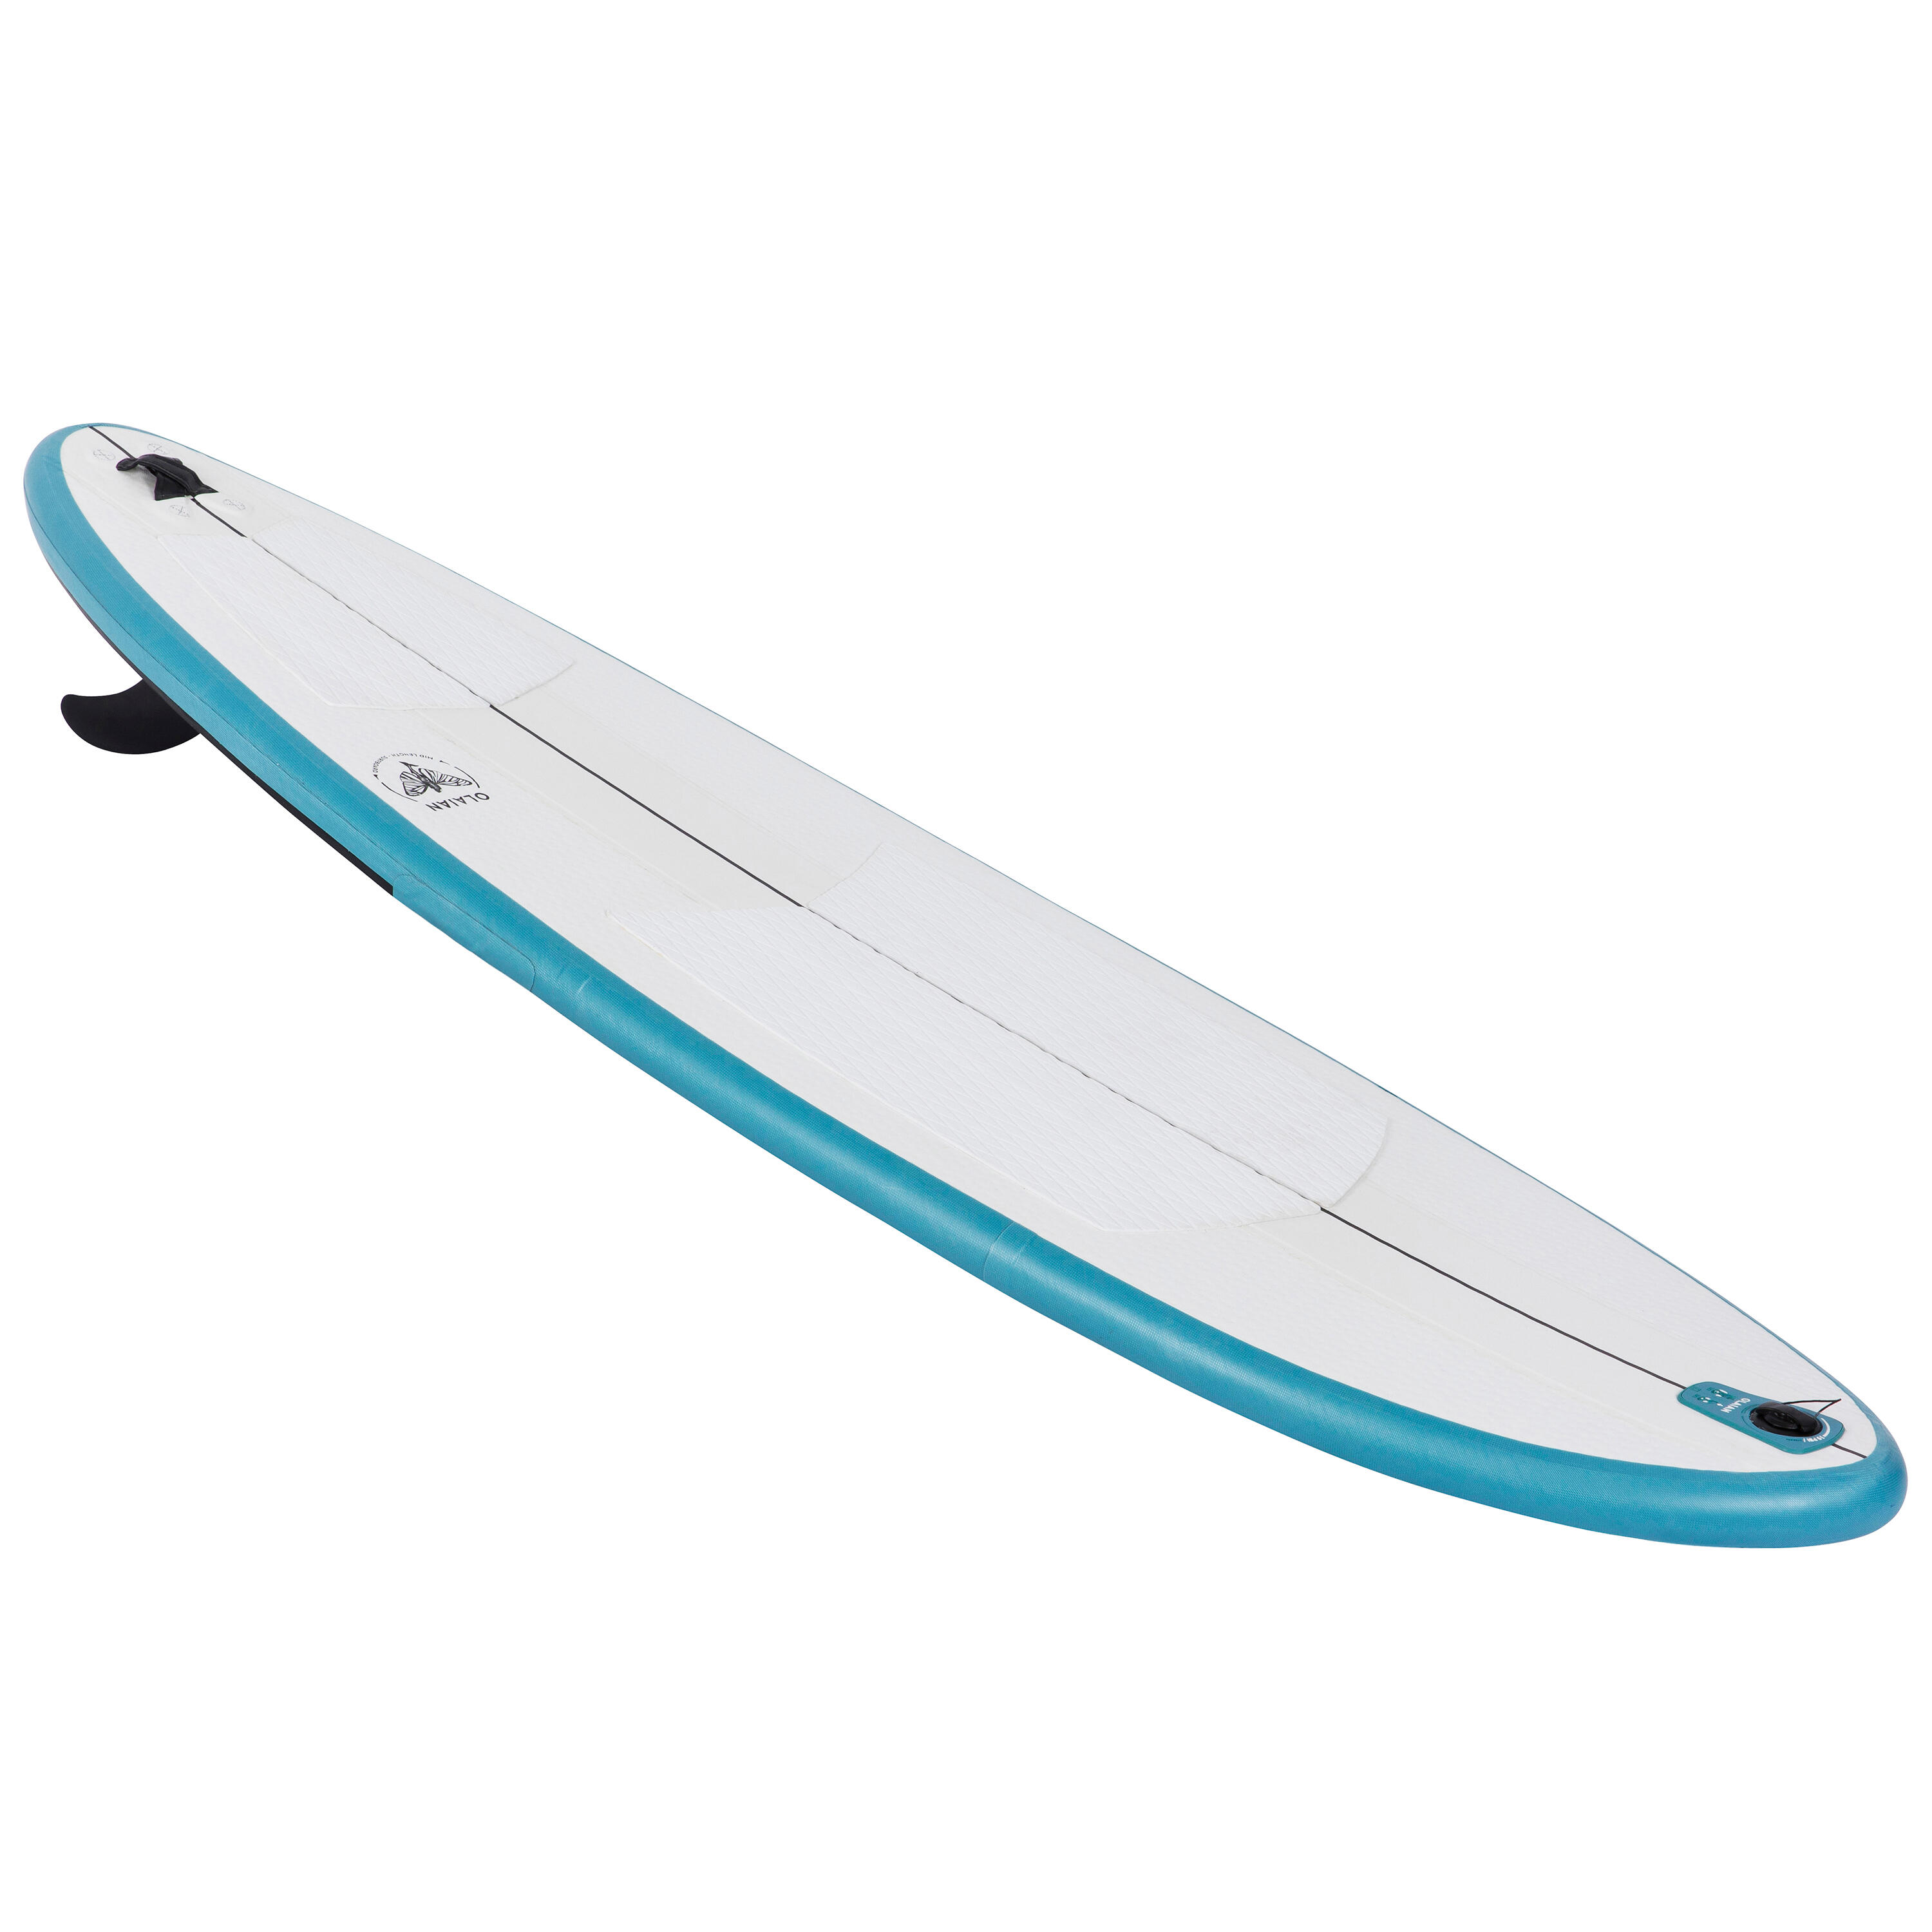 6'6" Inflatable Surfboard - Compact 500 Blue - OLAIAN